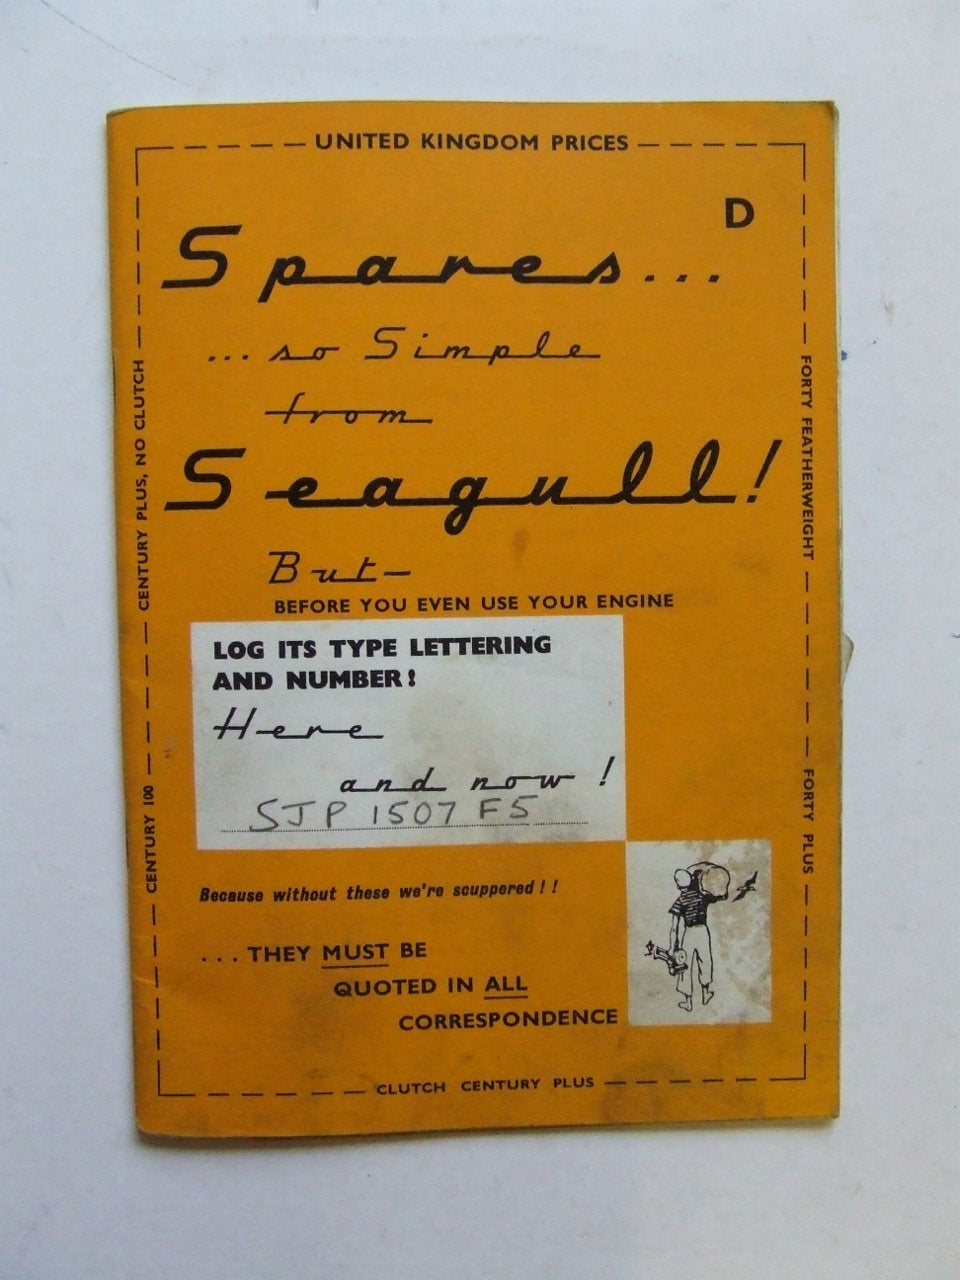 Spares...so simple from  Seagull  [Seagull outboard motor spares booklet]